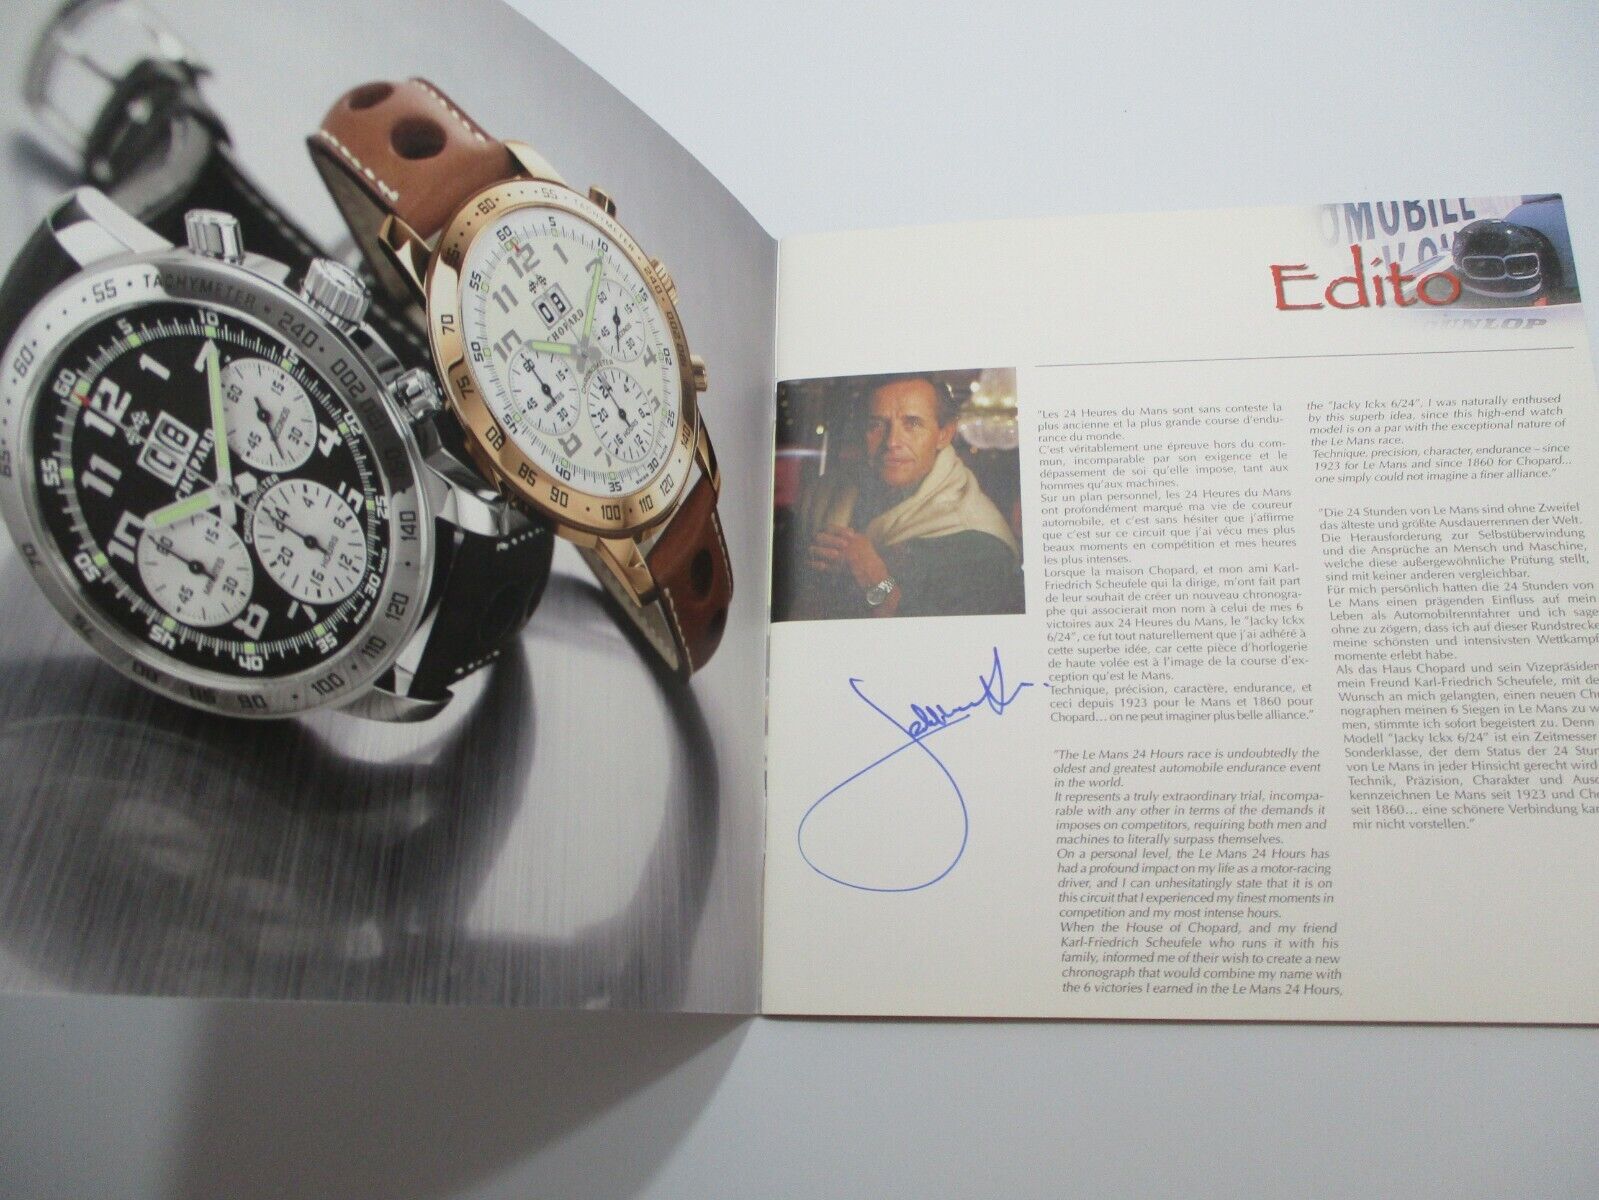 Genuine CHOPARD Jacky Ickx 6/24 Ltd Ed Chronograph Watch Autographed SIGNED Book